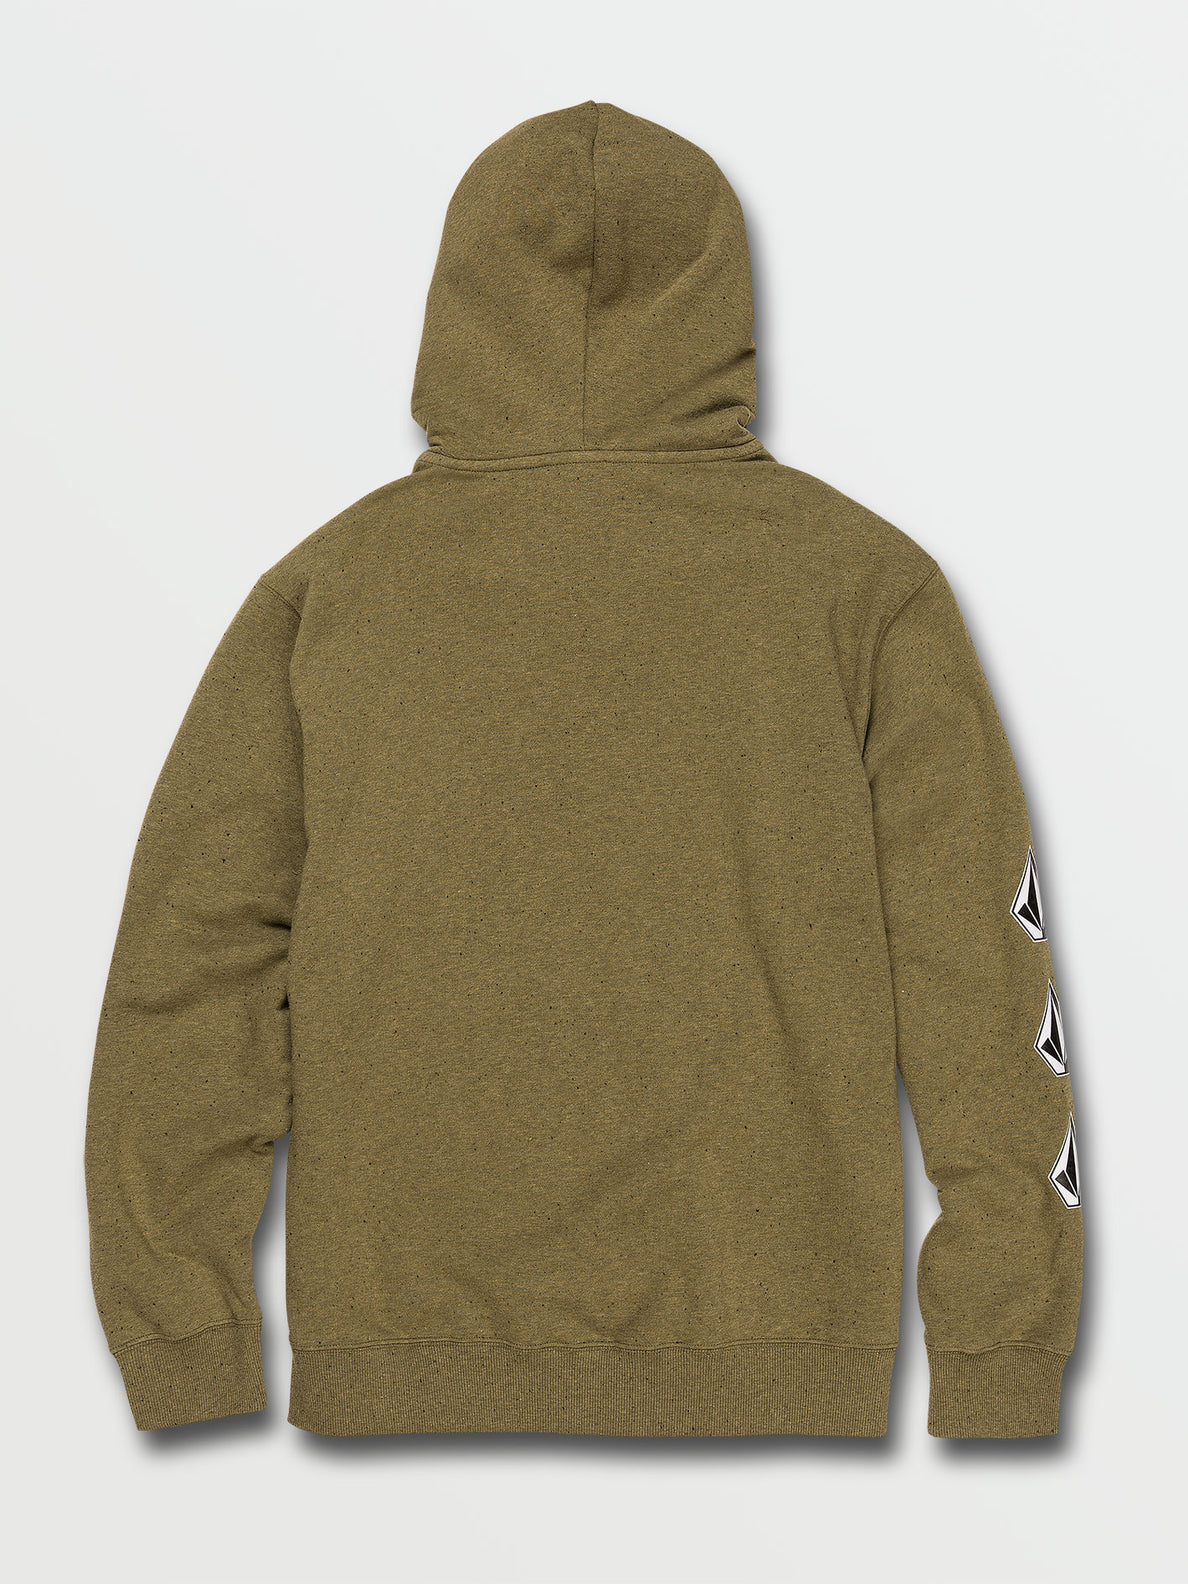 Iconic Stone Plus Pullover Hoodie - Martini Olive (A4142106_MTO) [B]